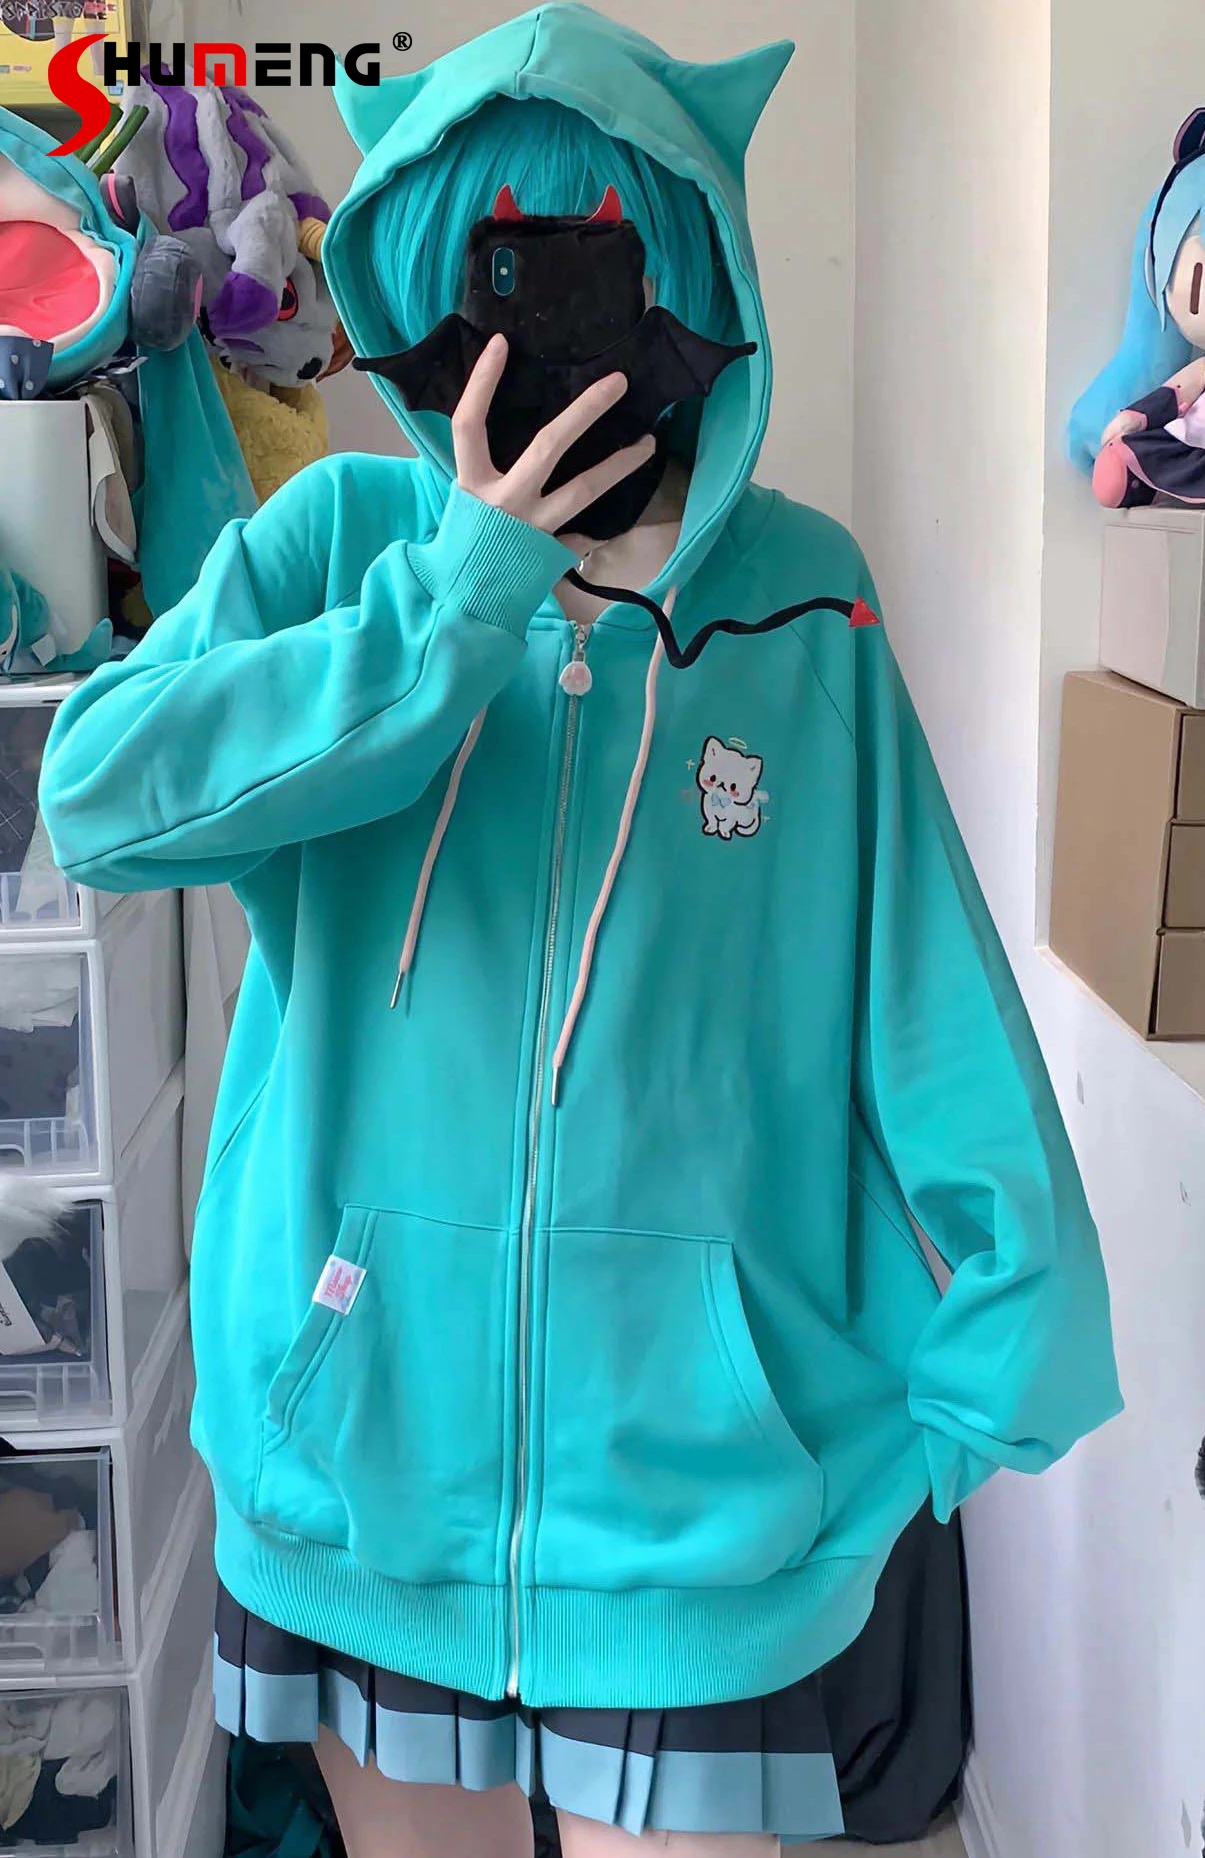 Japanese Sweet Women's Cat Embroidered Lake Blue Hooded Hoodies 2023 Autumn New Loose Cute Fleece-Lined Padded Sweatshirt Coat fleece lined tracksuits women casual solid warm suits hoodies sweatpants autumn winter pullover sweatshirts pants 2 piece set